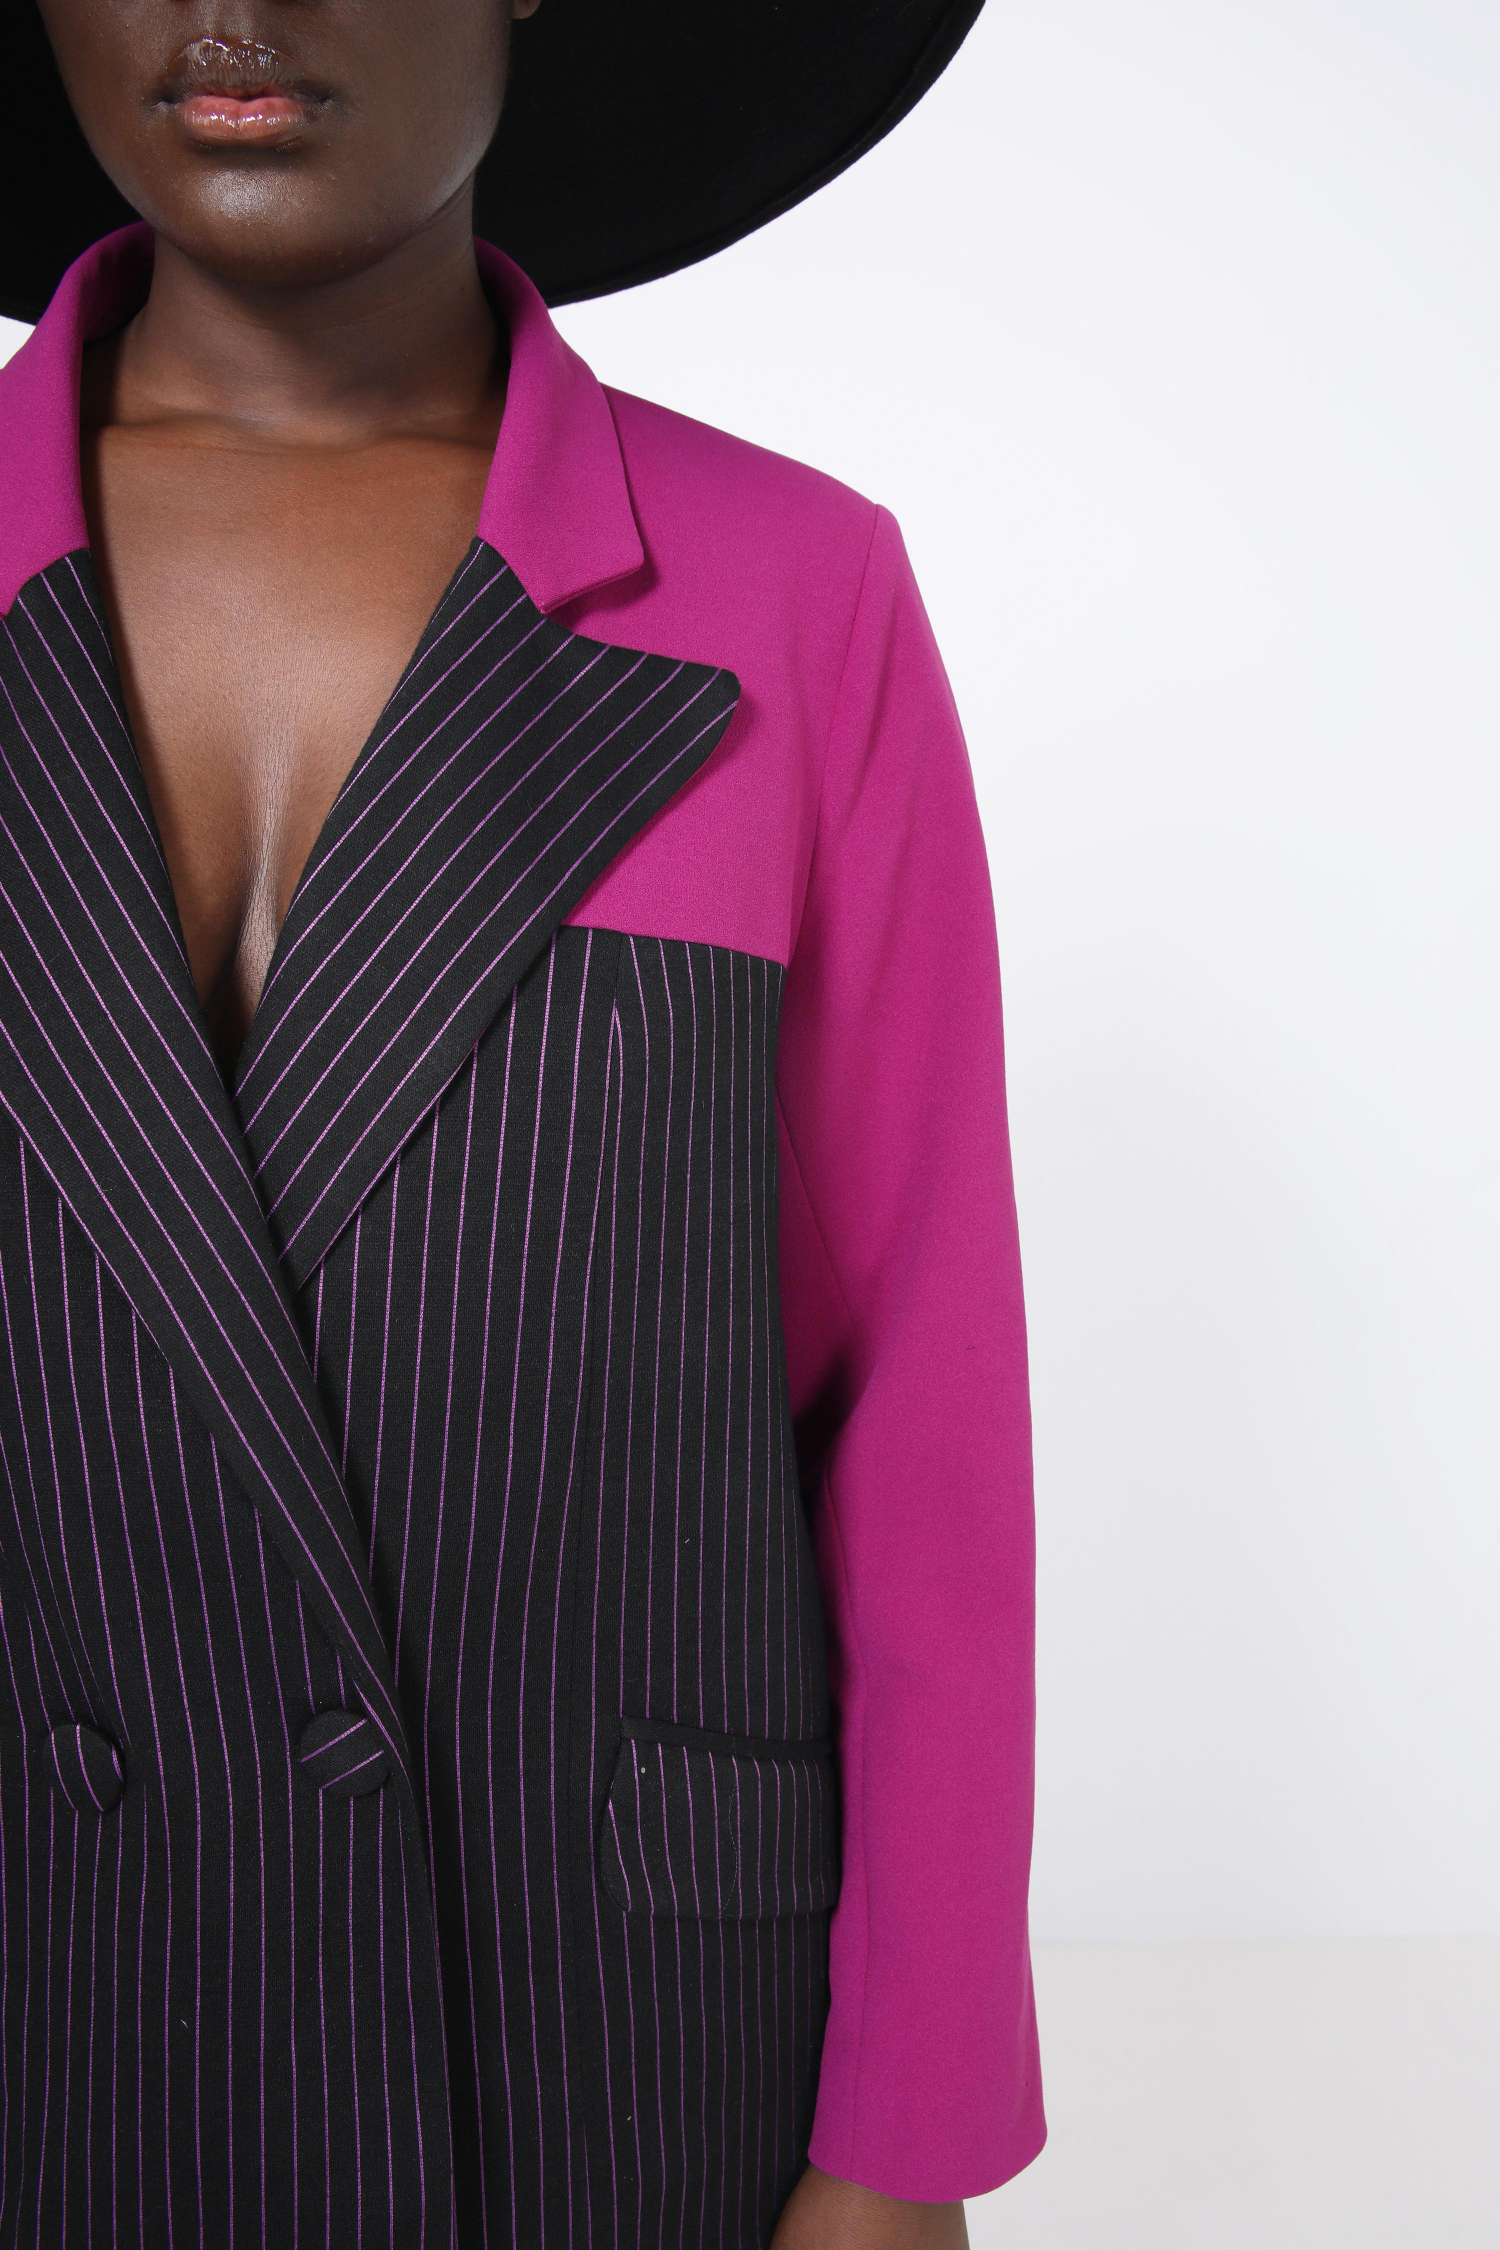 Two-tone striped/magenta knit suit jacket